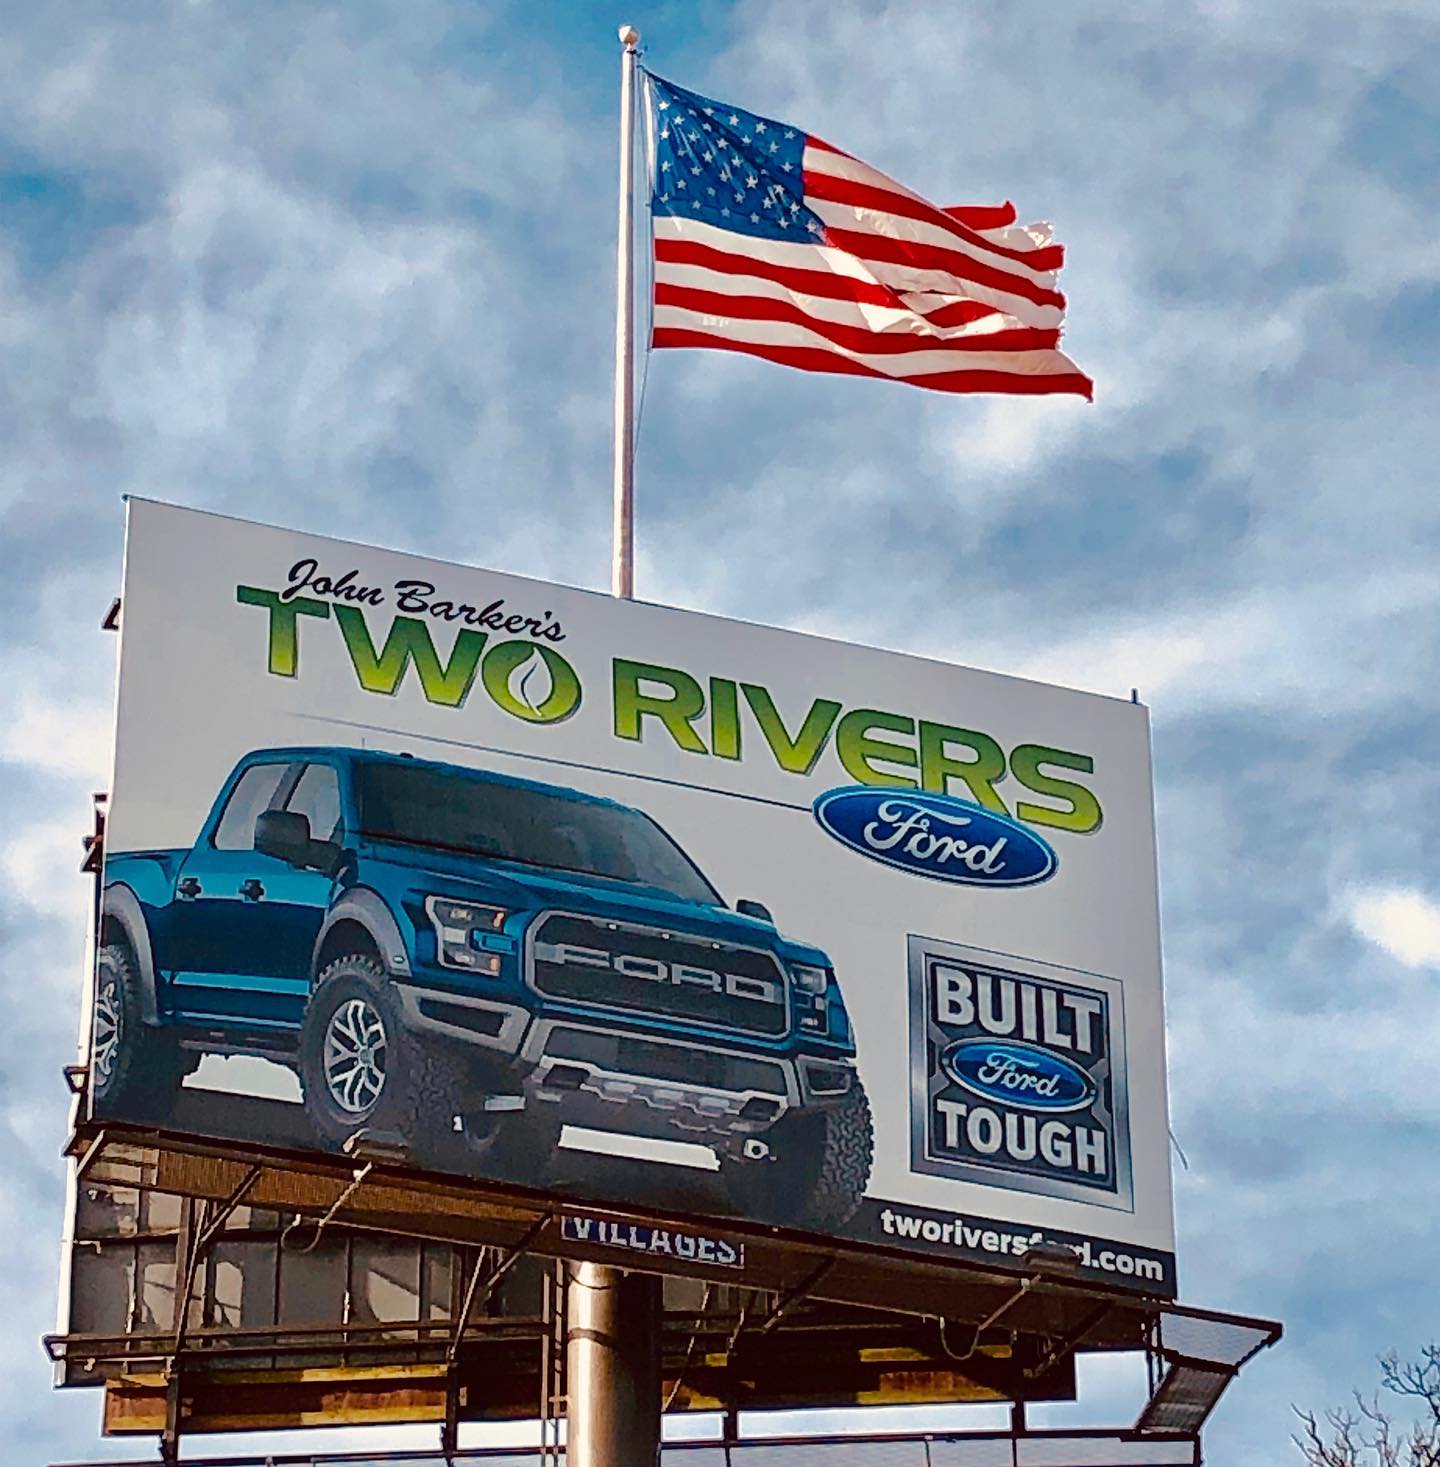 The Real Meaning of Memorial Day – Two Rivers Ford Blog